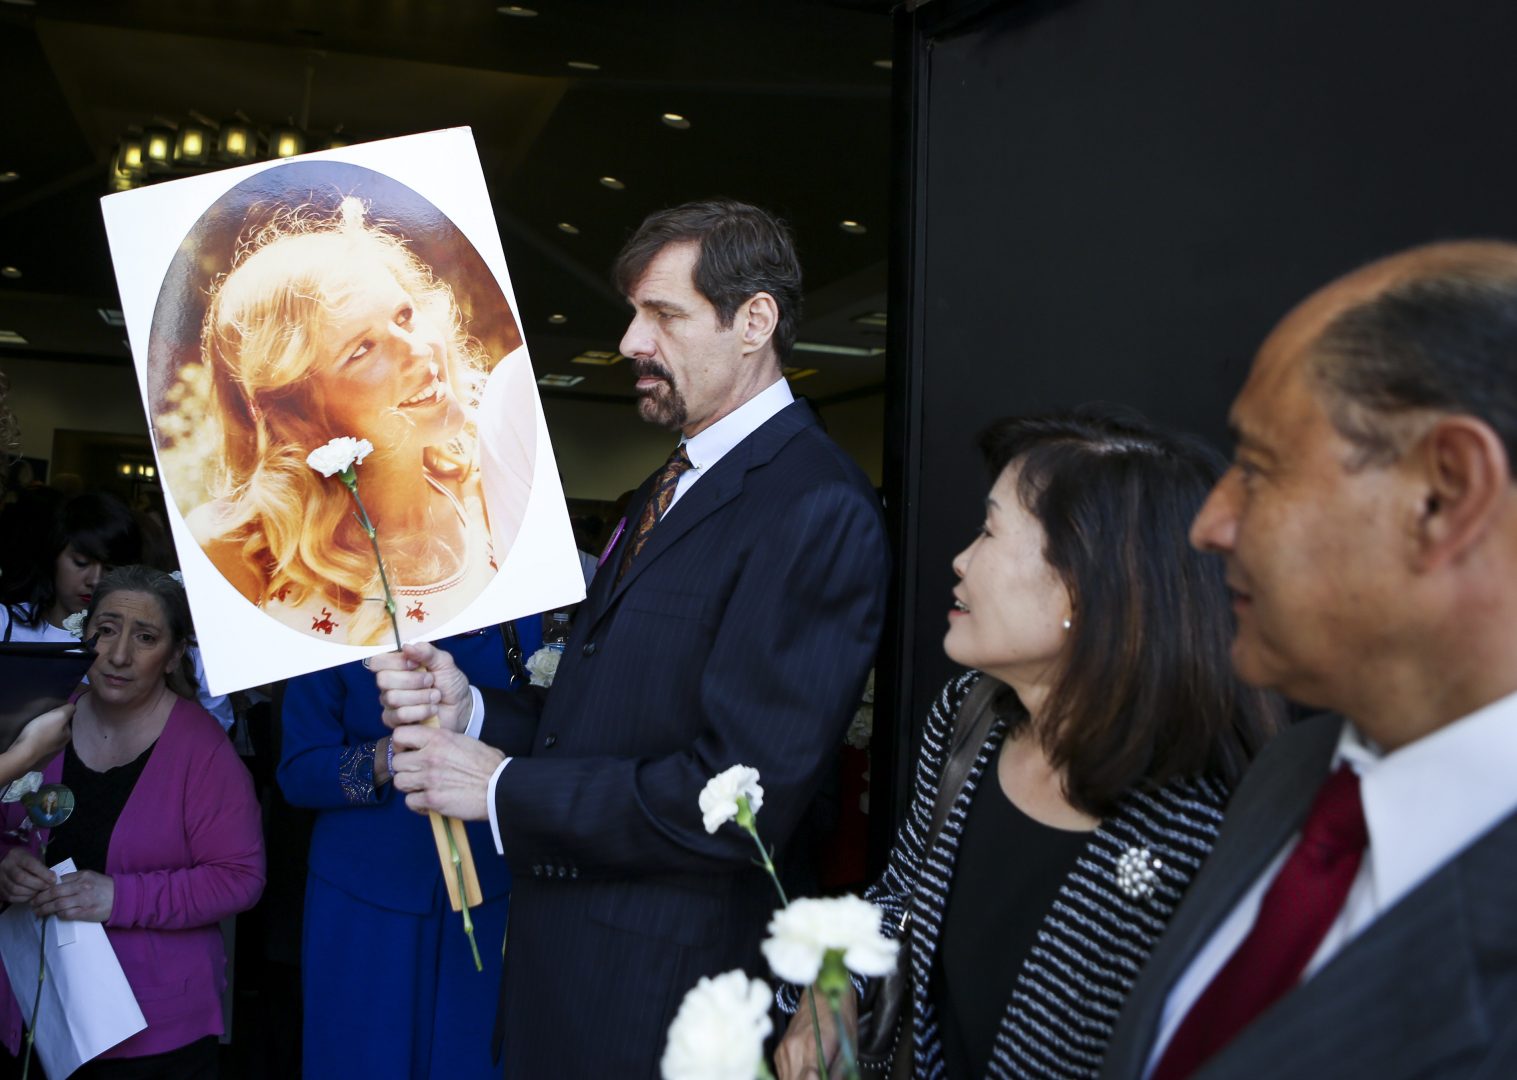 Dr. Henry T. Nicholas III holds a photo of his sister Marsy, who was killed in 1983 by an ex-boyfriend, during the Orange County Victims' Rights March and Rally, Friday, April 26, 2013, in Santa Ana, Calif. 